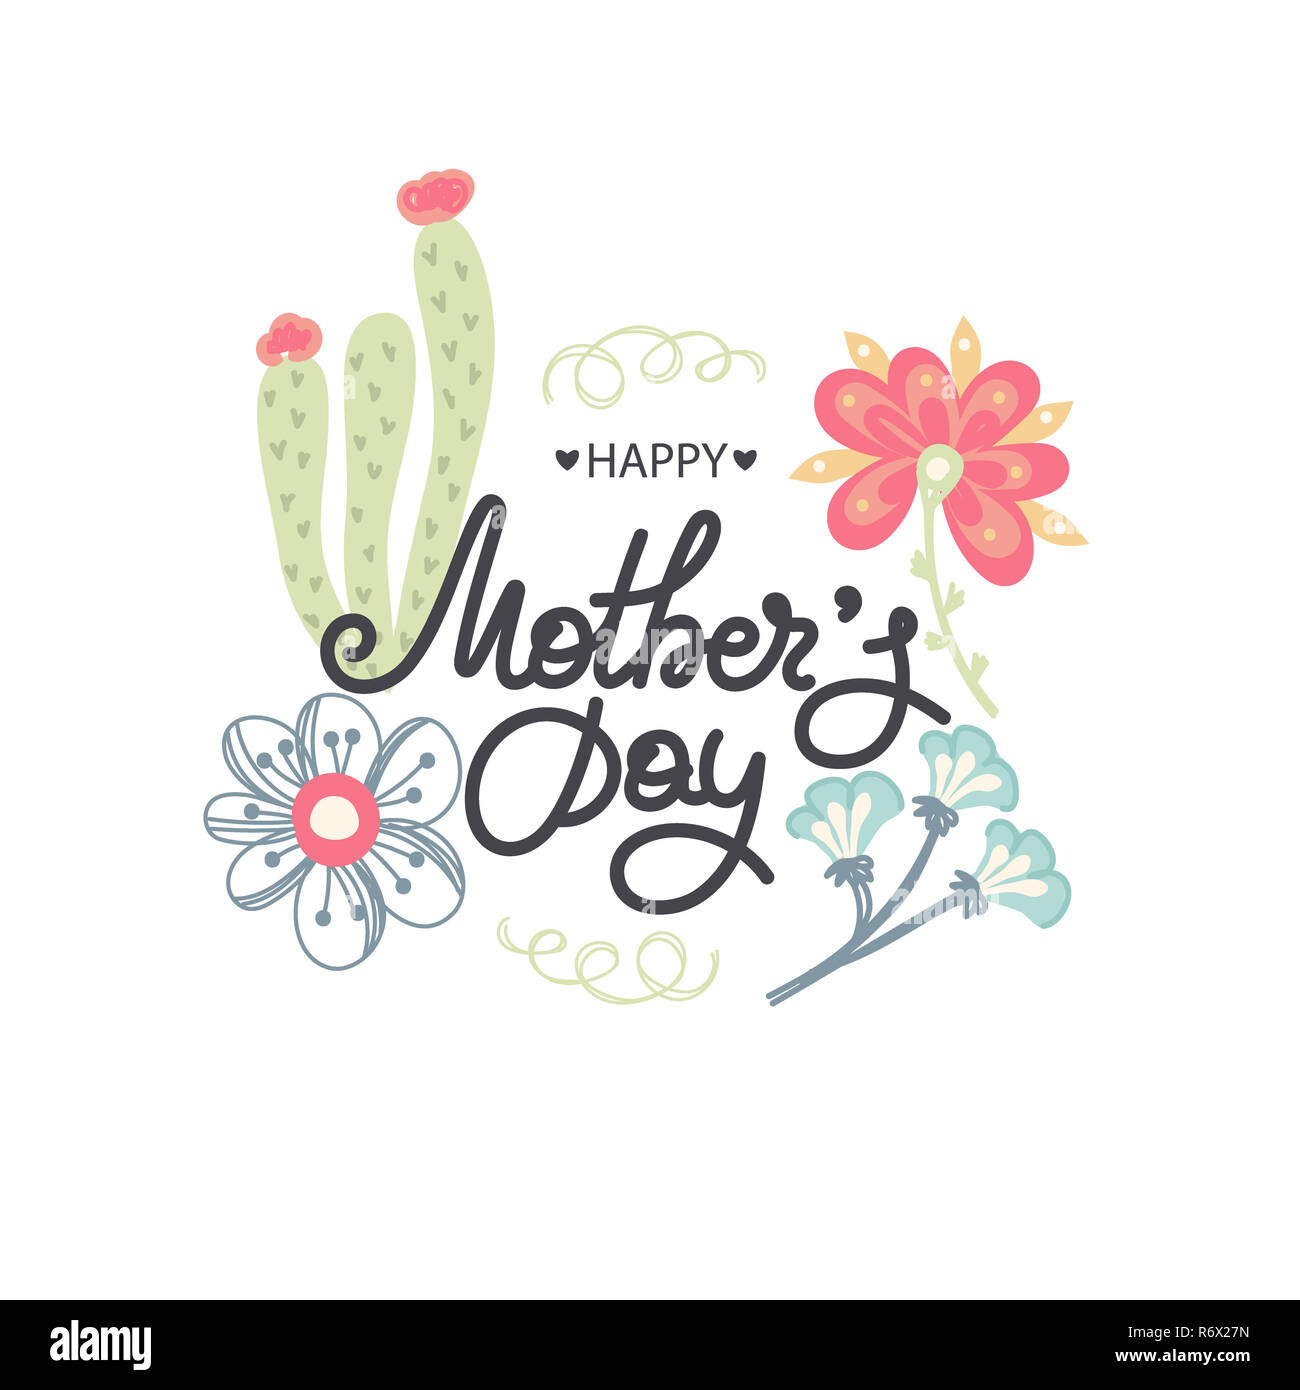 Happy Mother's day. Holiday of mom. Lettering with floral decoration. Frame of flowers. Women's celebration. Caligraphy. Card, postcard, invination, banner, poster Stock Photo